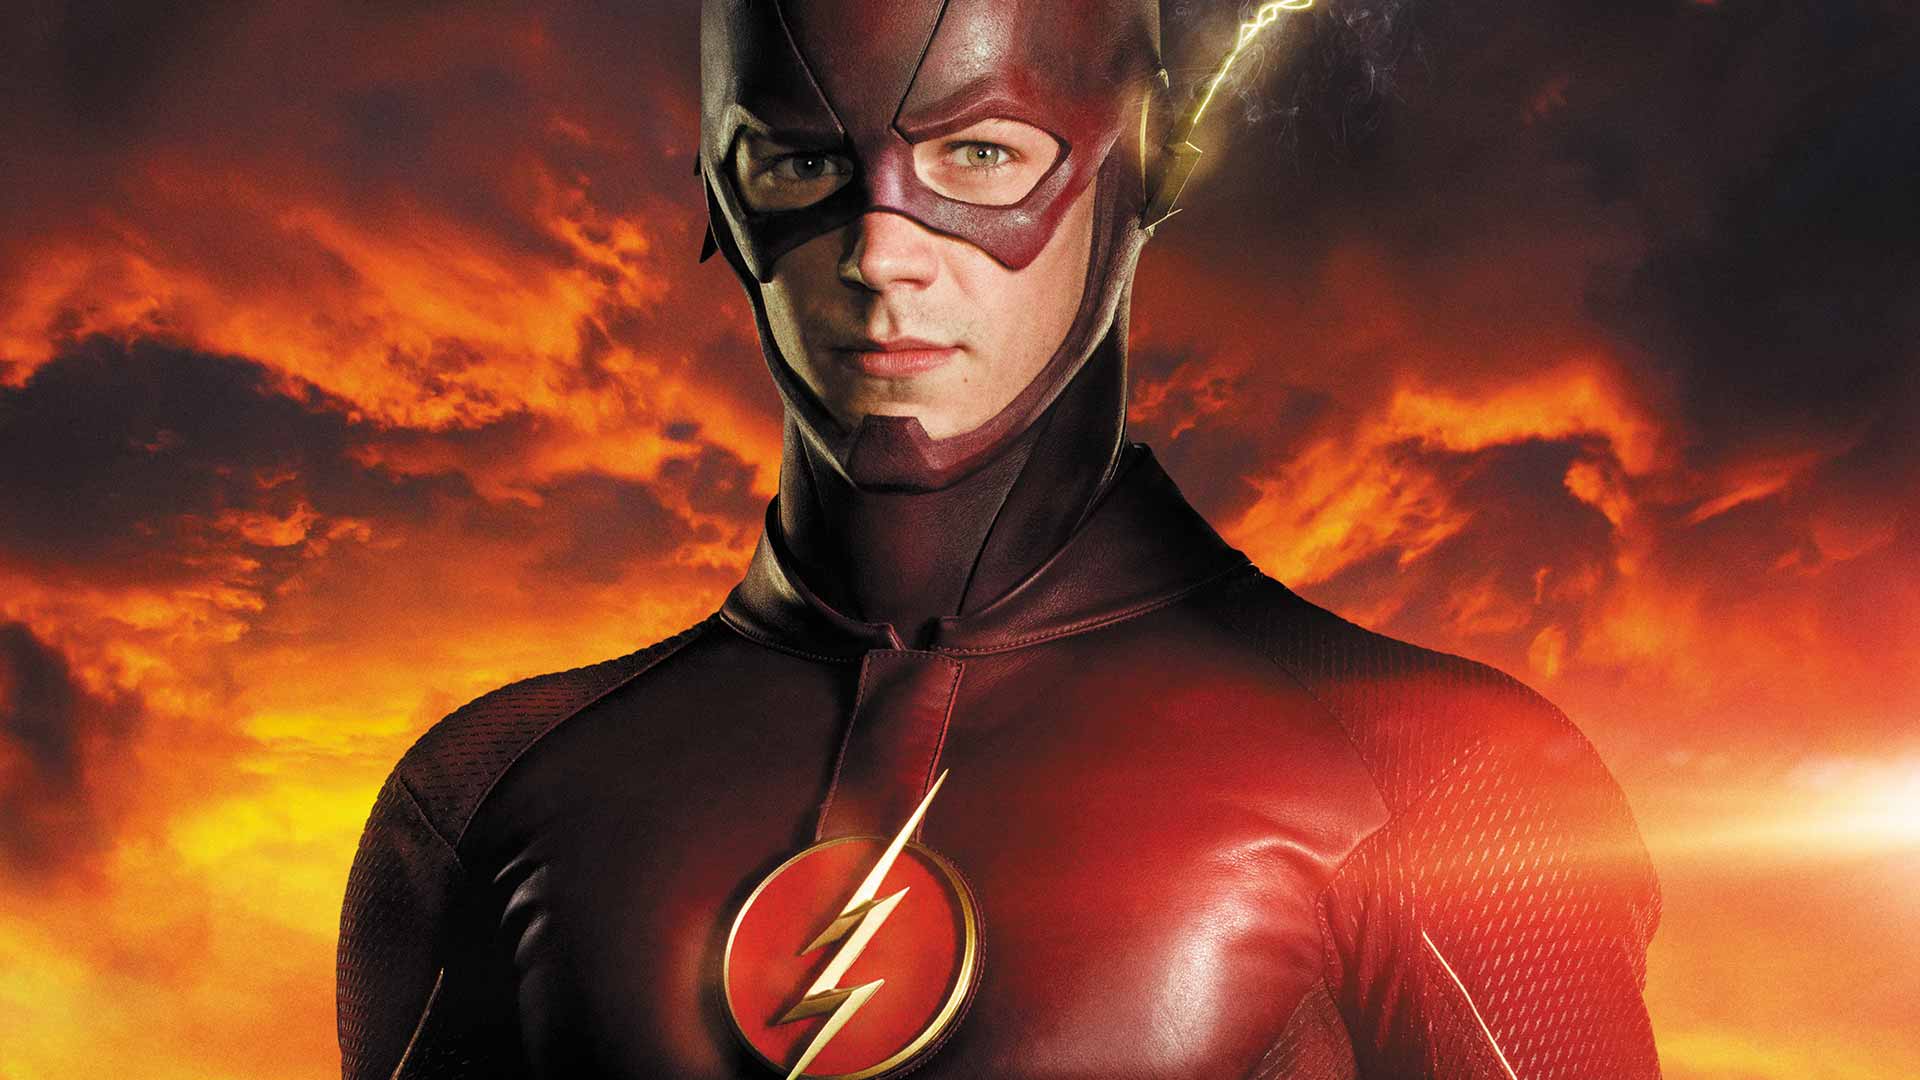 Will A Flash in time really save Nine?